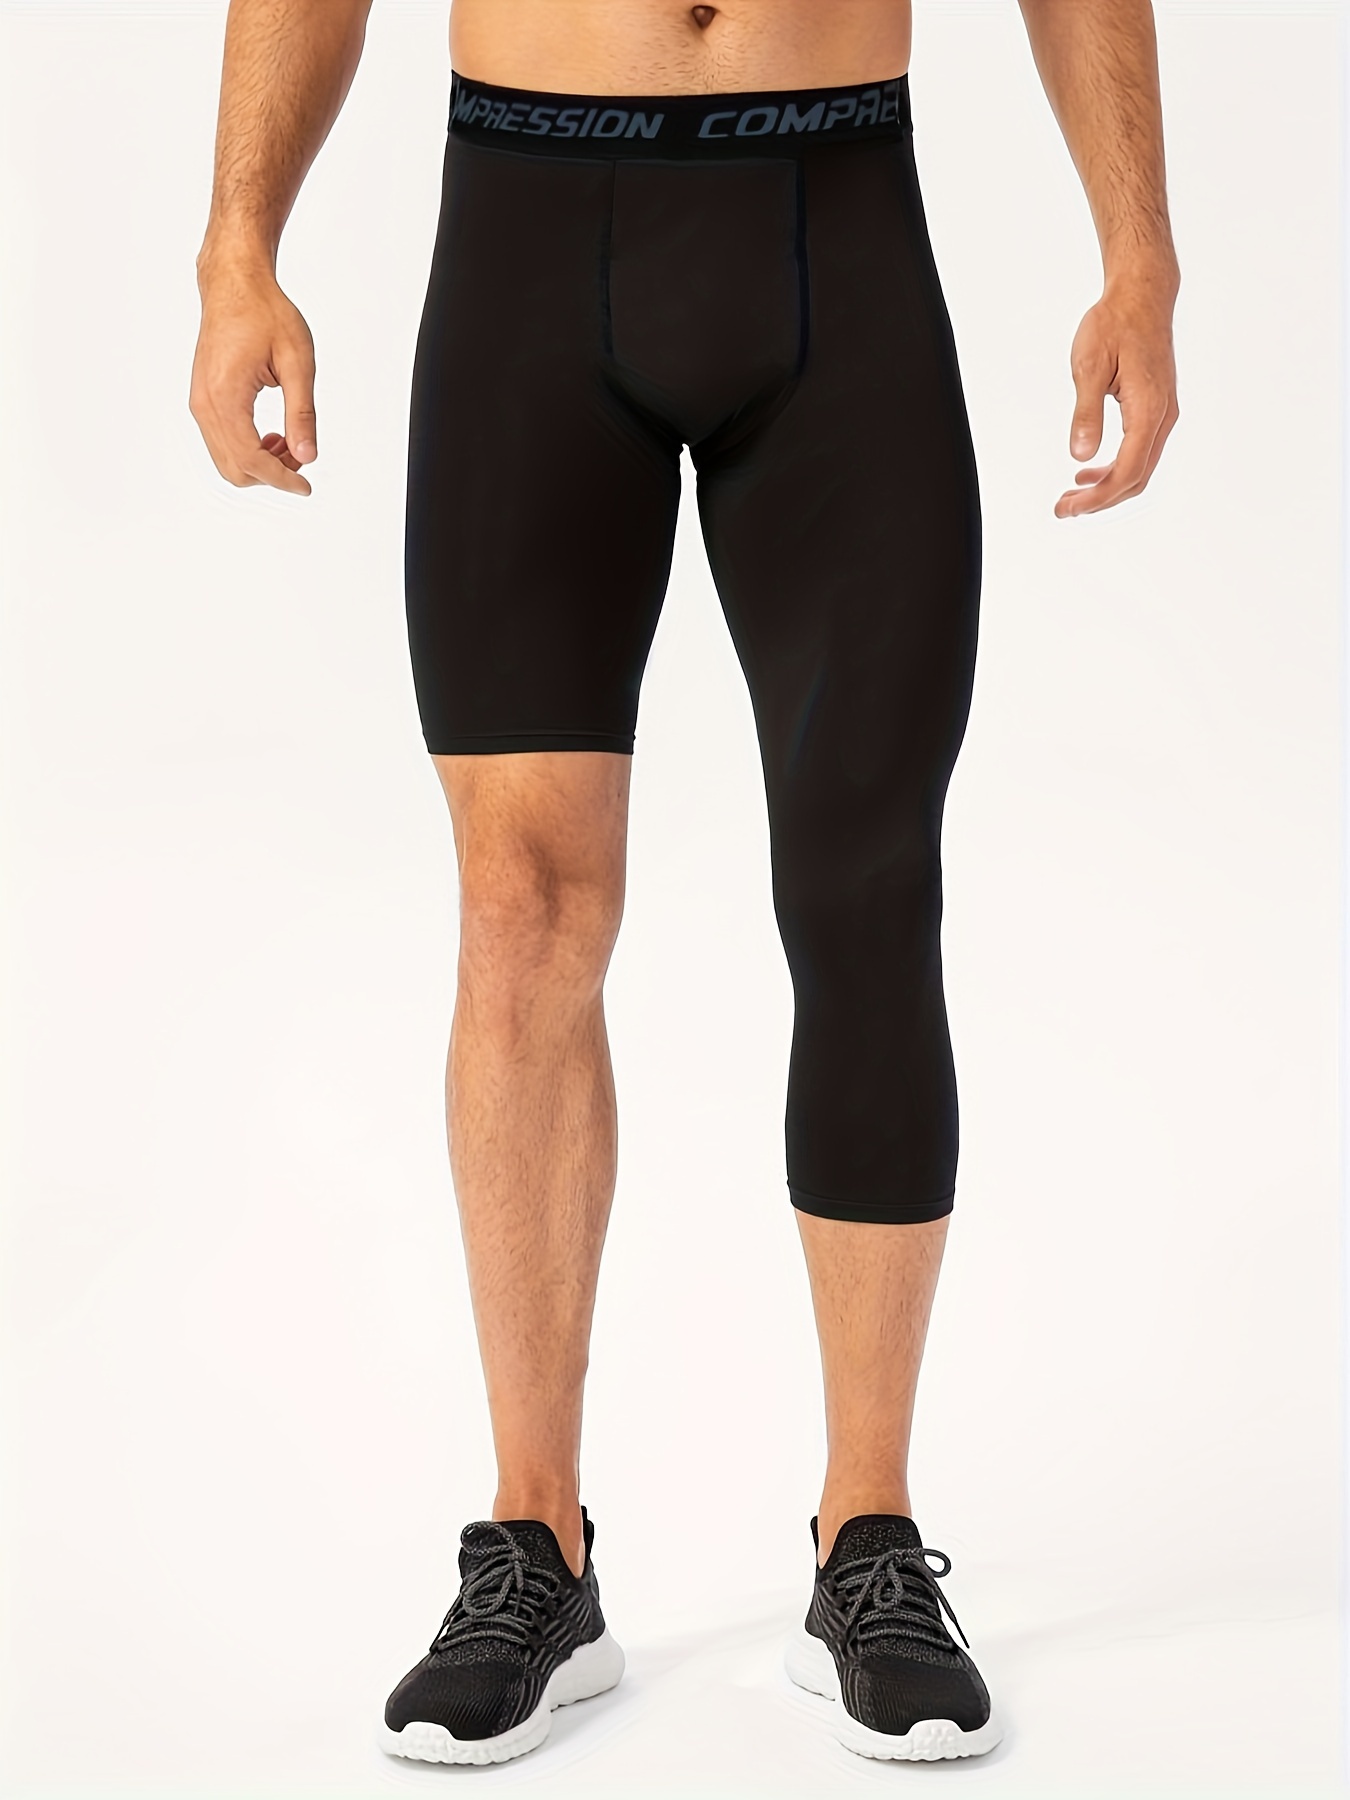 Men's One Leg Leggings, 3/4 Compression Pants, Base Layer Legging Tights  Wick Sweat Away Quickly For Outdoor Sports